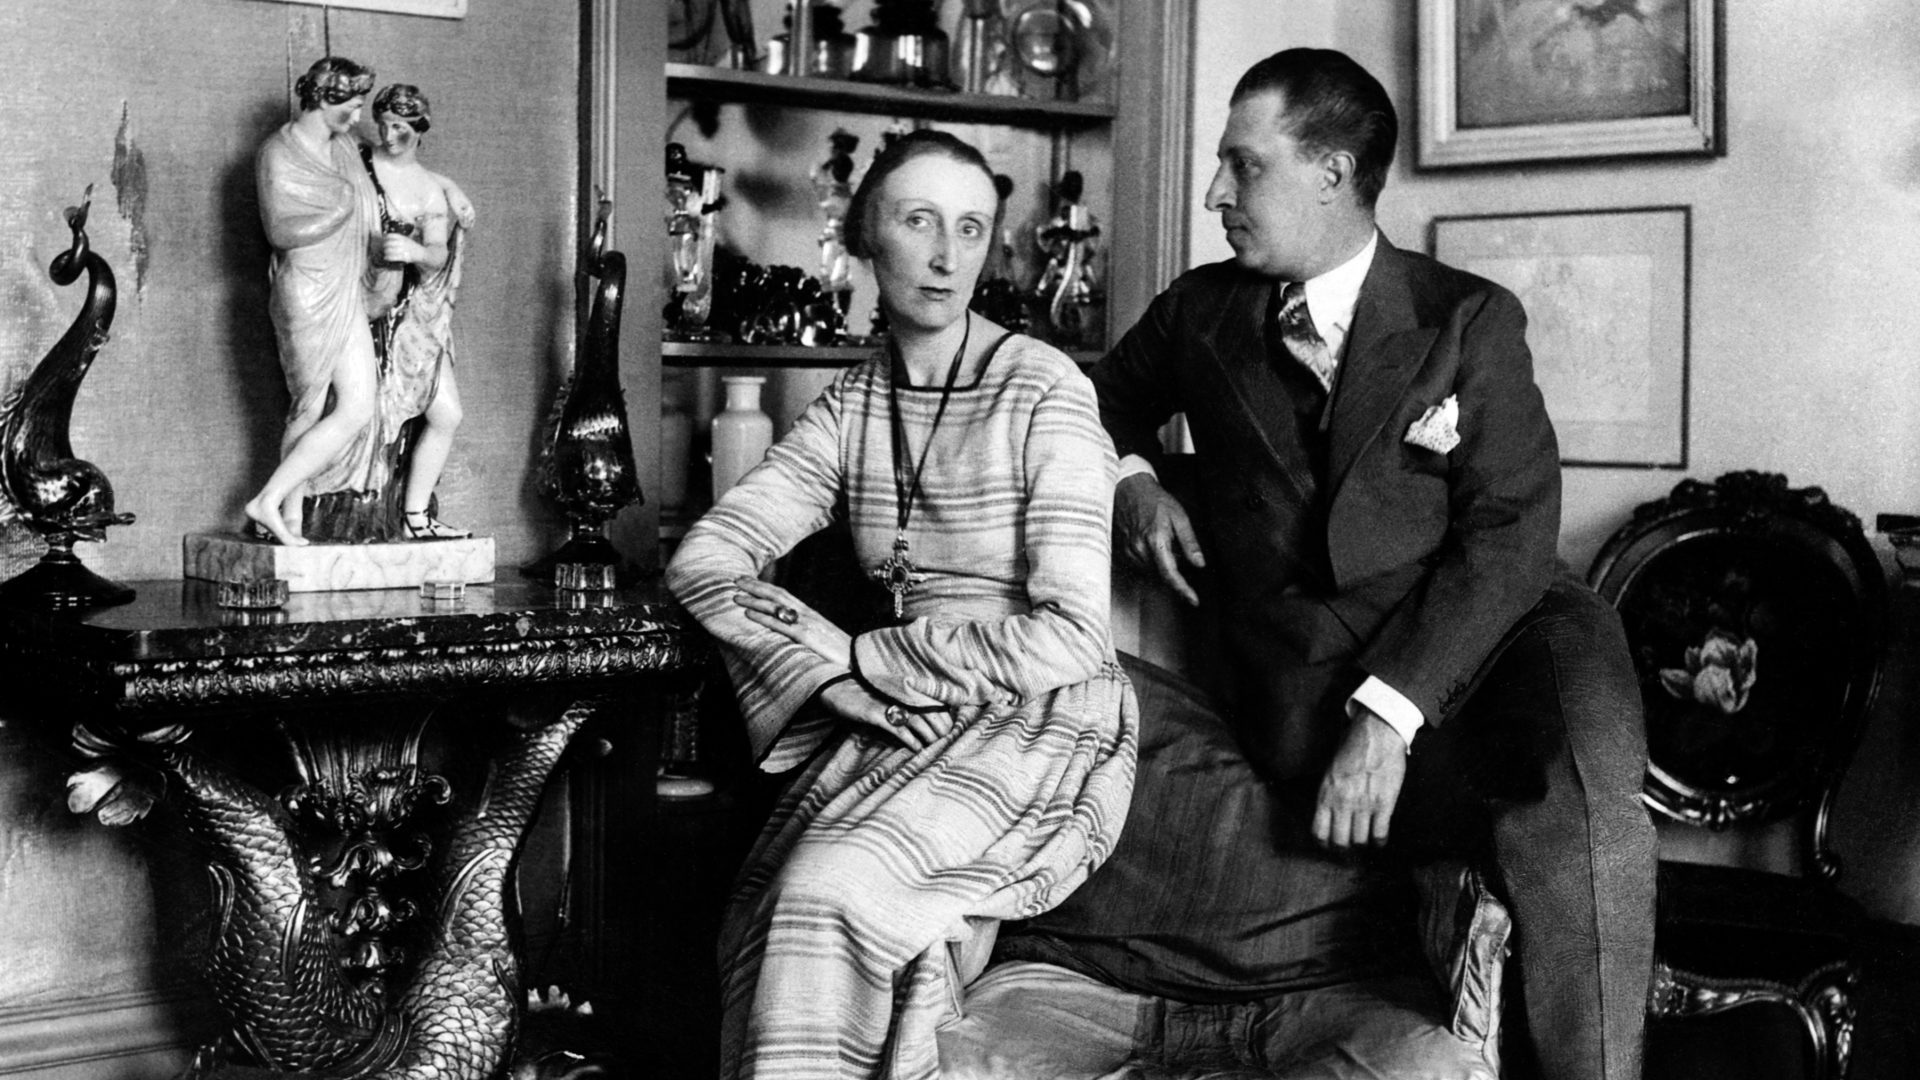 Dame Edith Sitwell with her brother, Sir Osbert Sitwell. Photo: Hulton-Deutsch/Corbis/
Getty